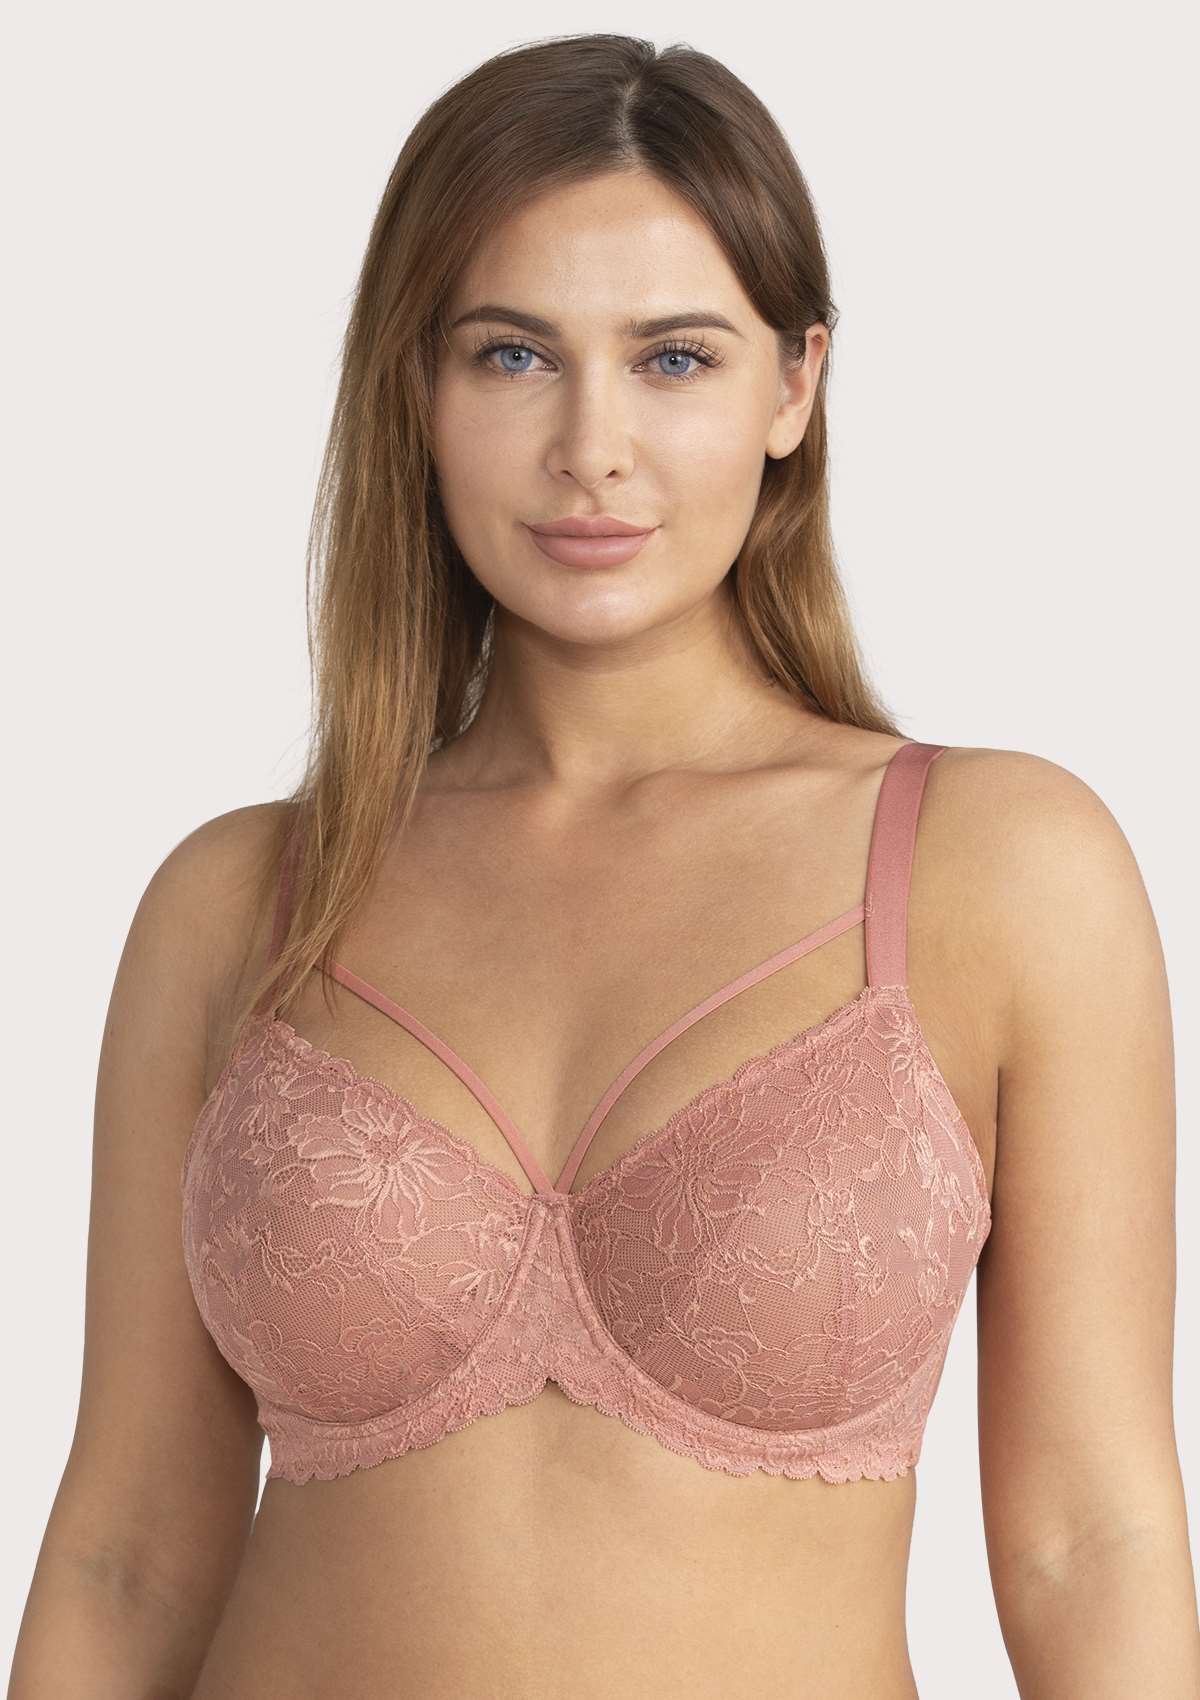 HSIA Pretty In Petals Lace Bra And Panty Sets: Bra For Big Boobs - Light Coral / 36 / DDD/F